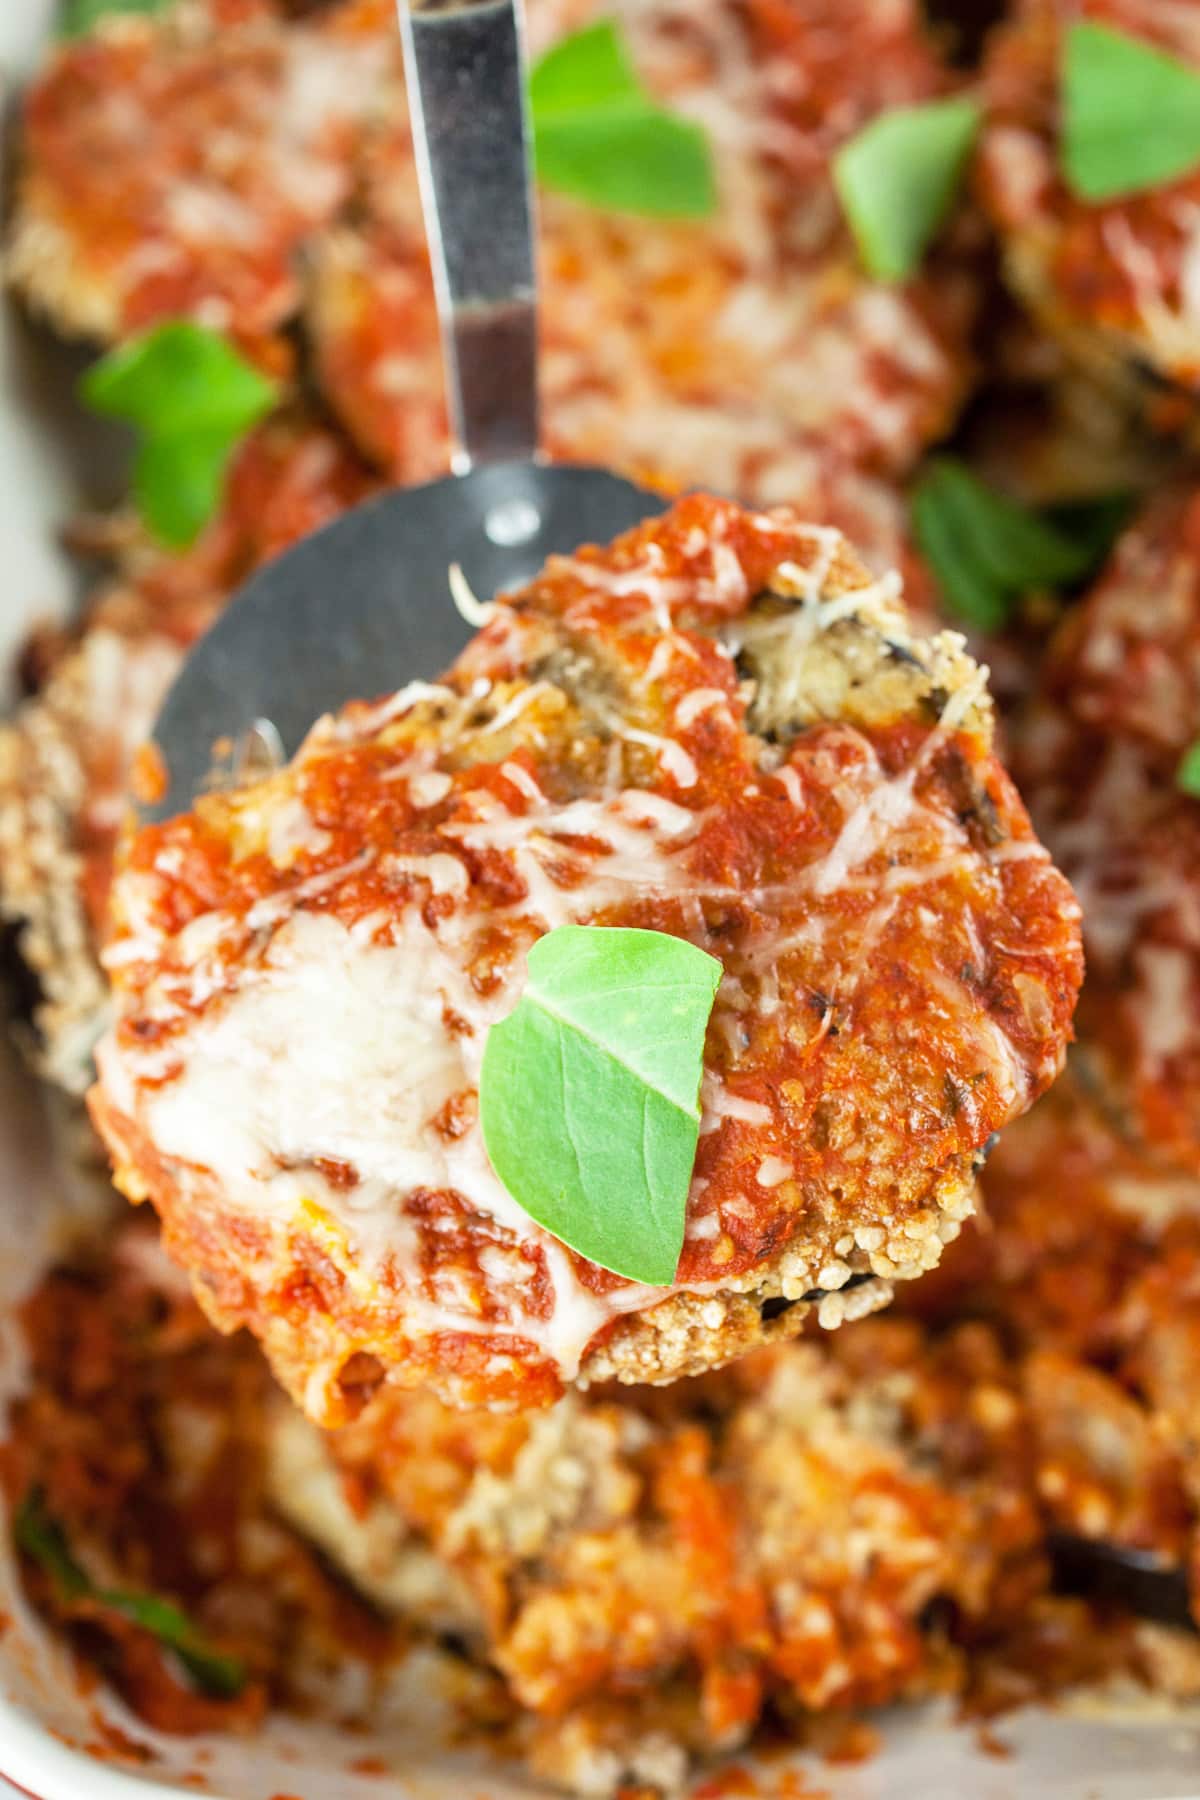 Baked eggplant parmesan slice lifted from casserole dish on metal spatula.